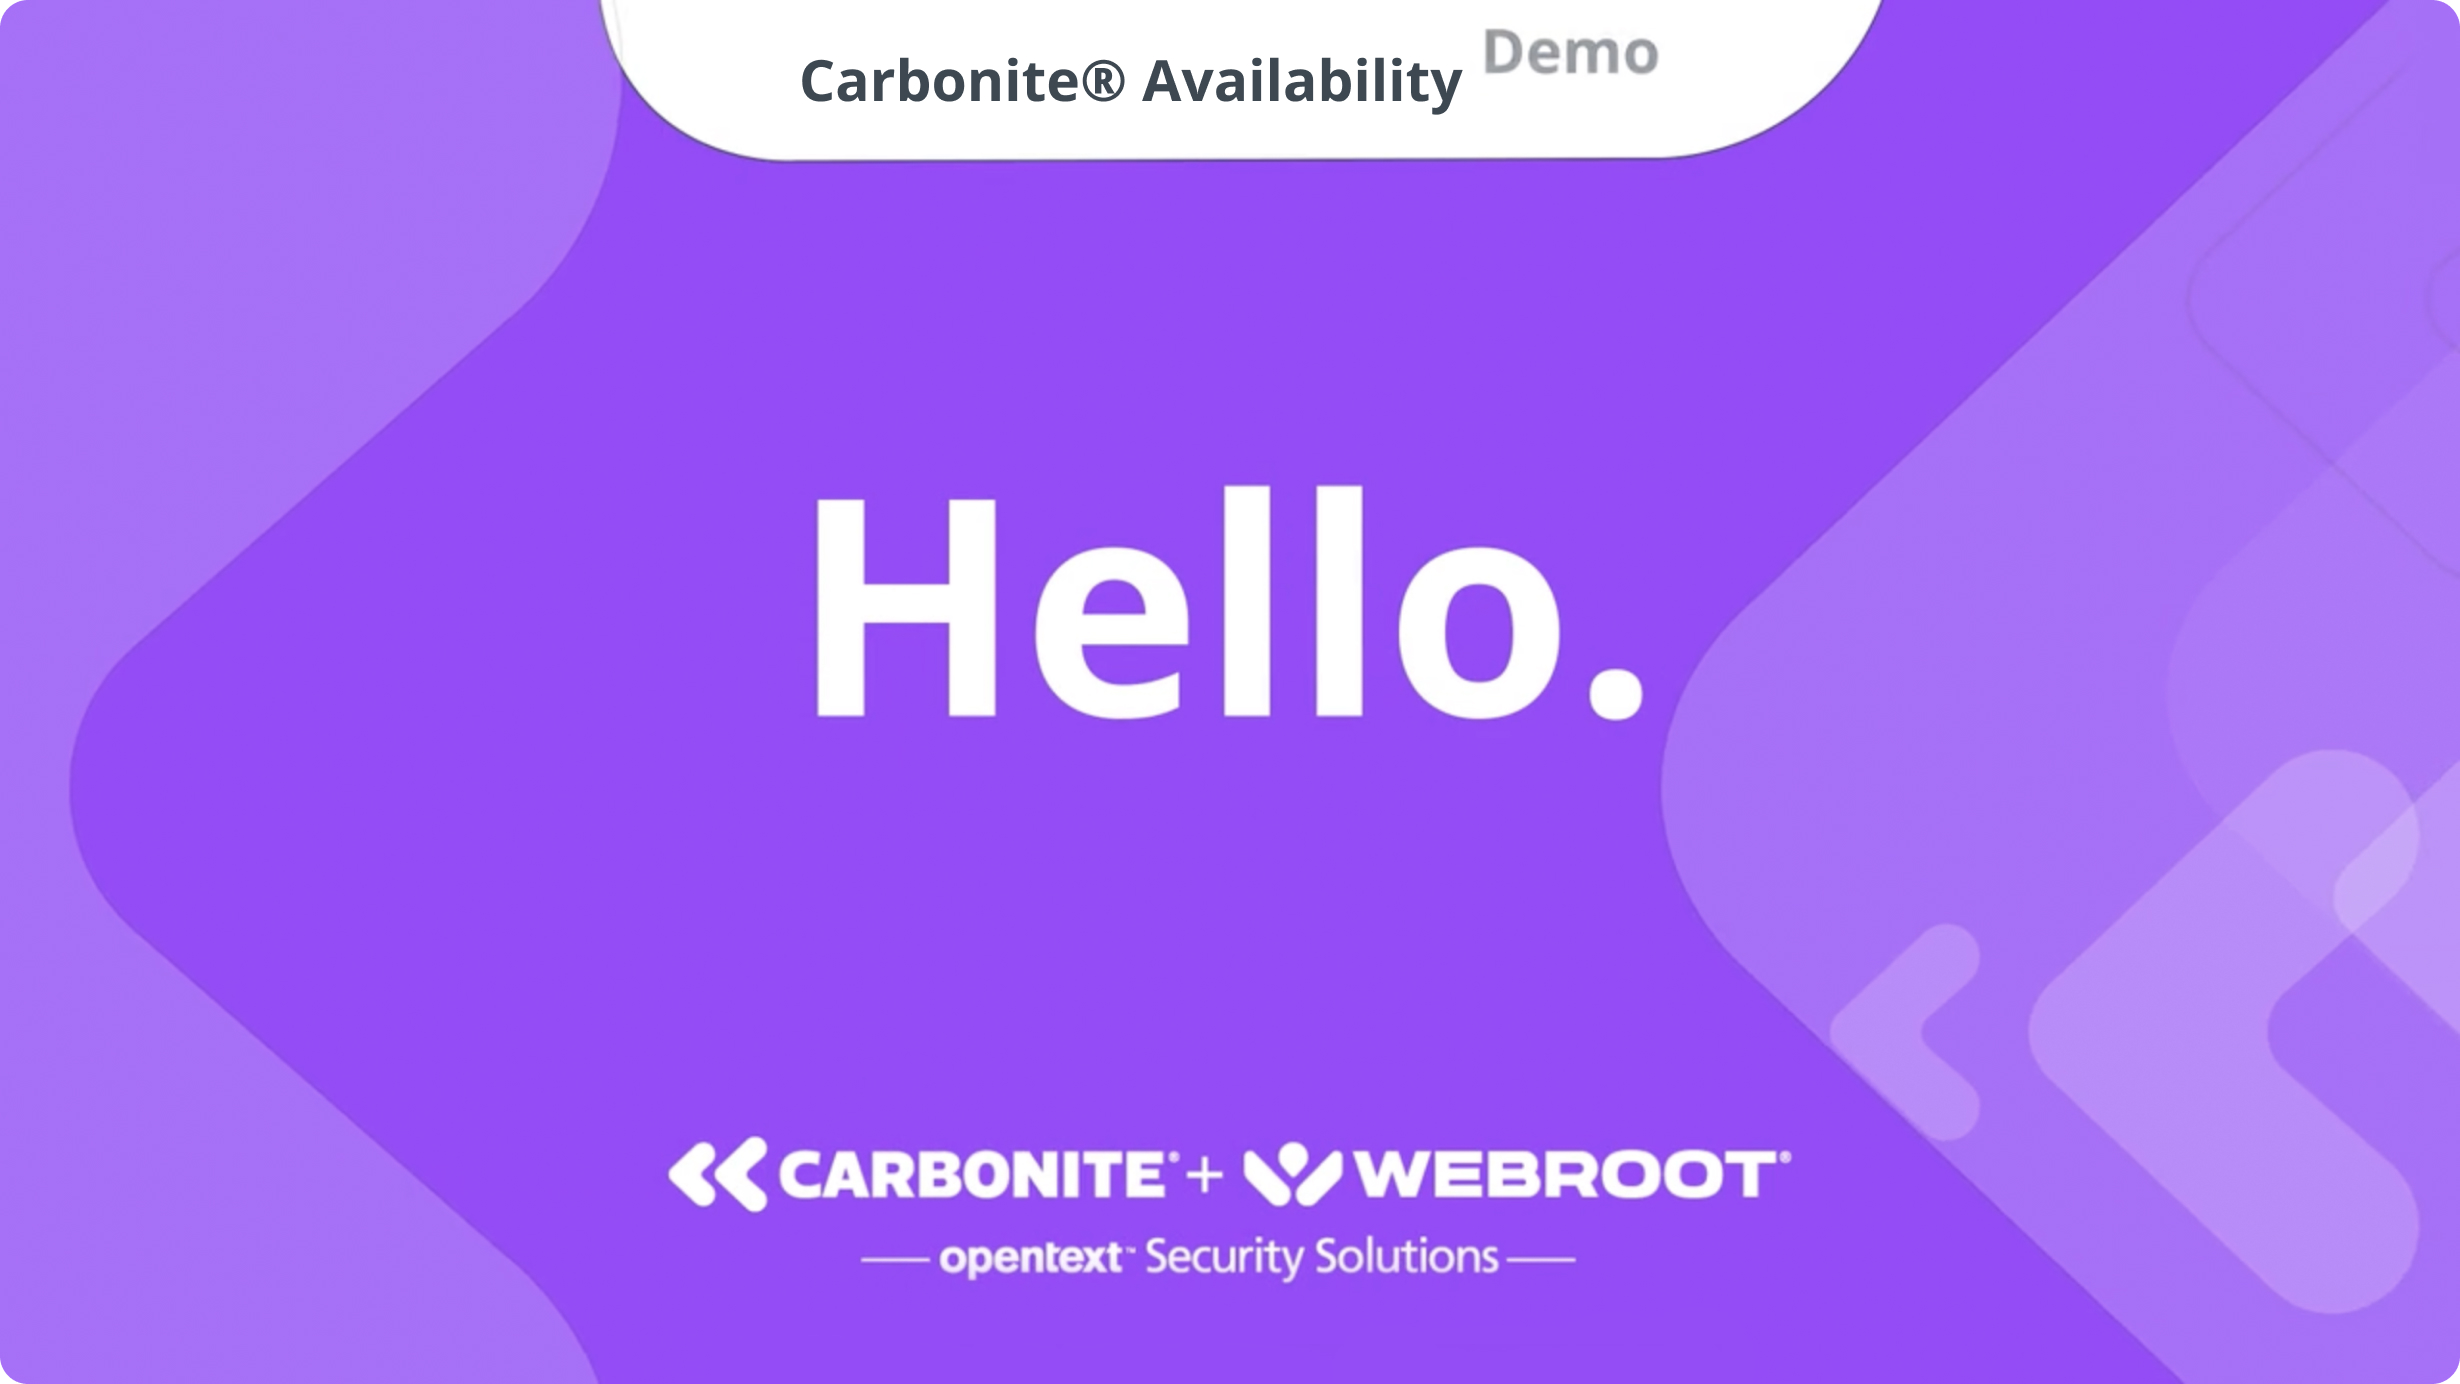 carbonite availability download